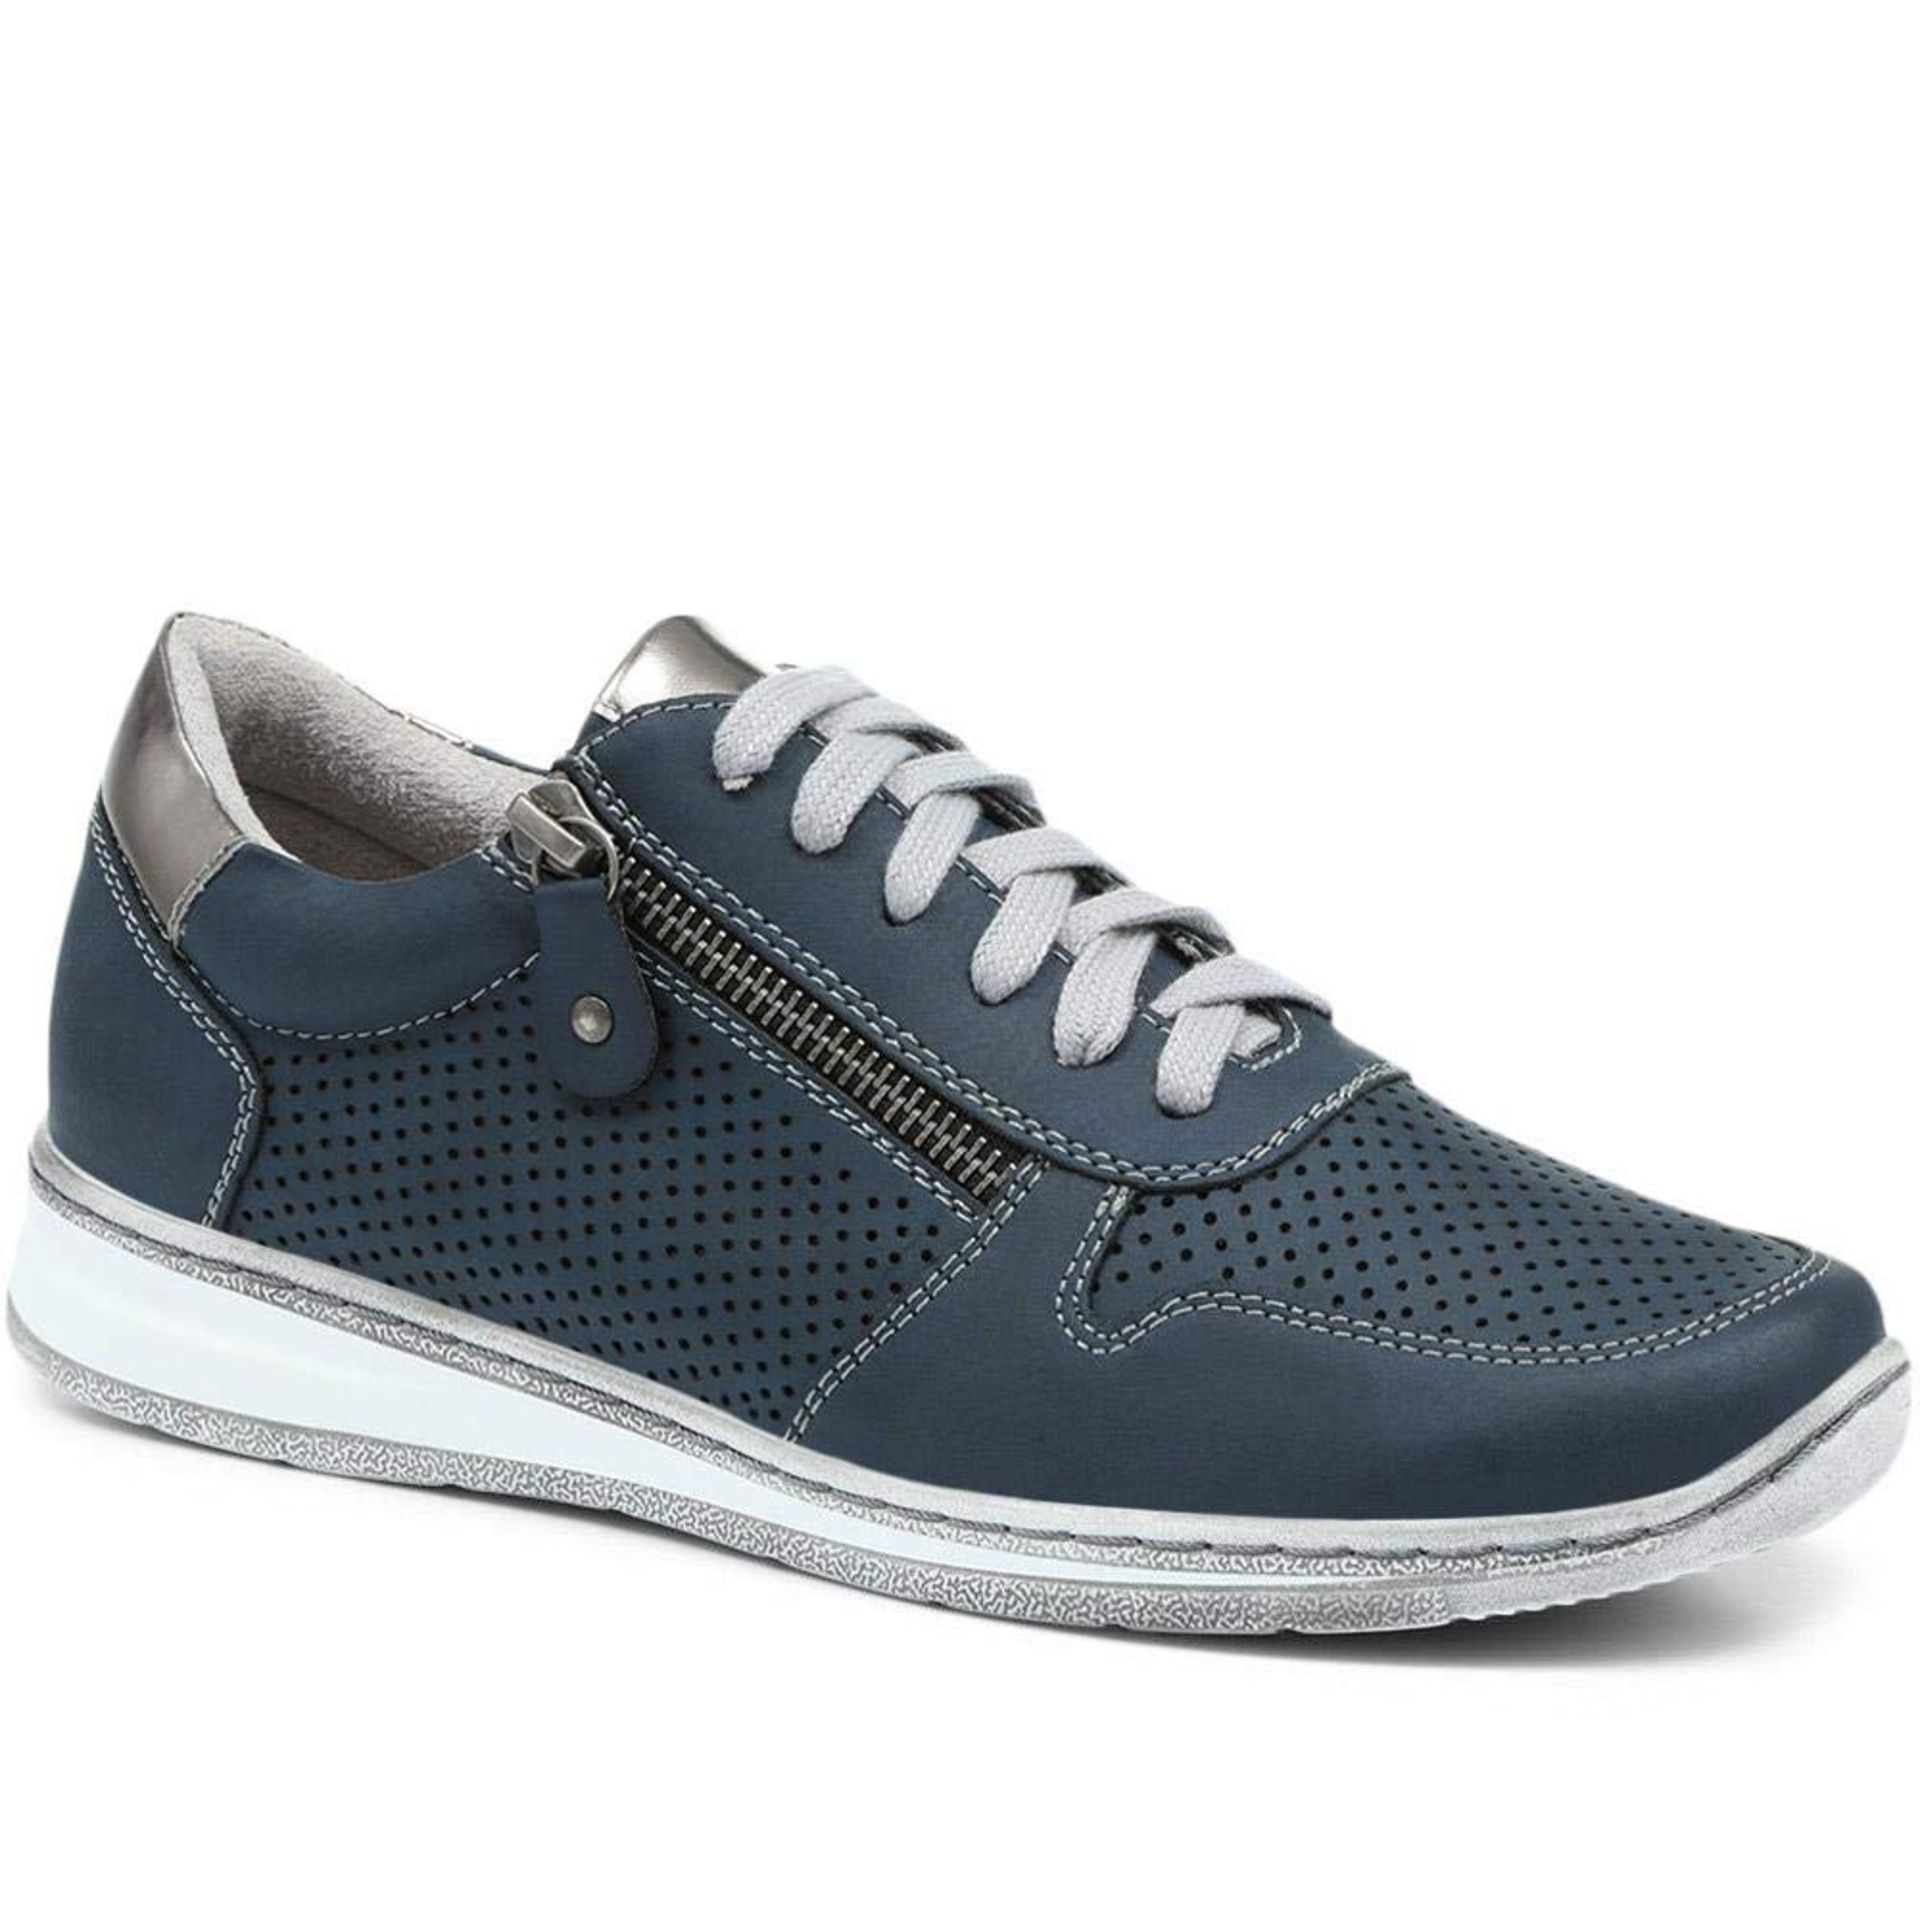 RRP £39.95 Pavers Ladies Casual Lace-Up Trainers - Navy Size 5 UK